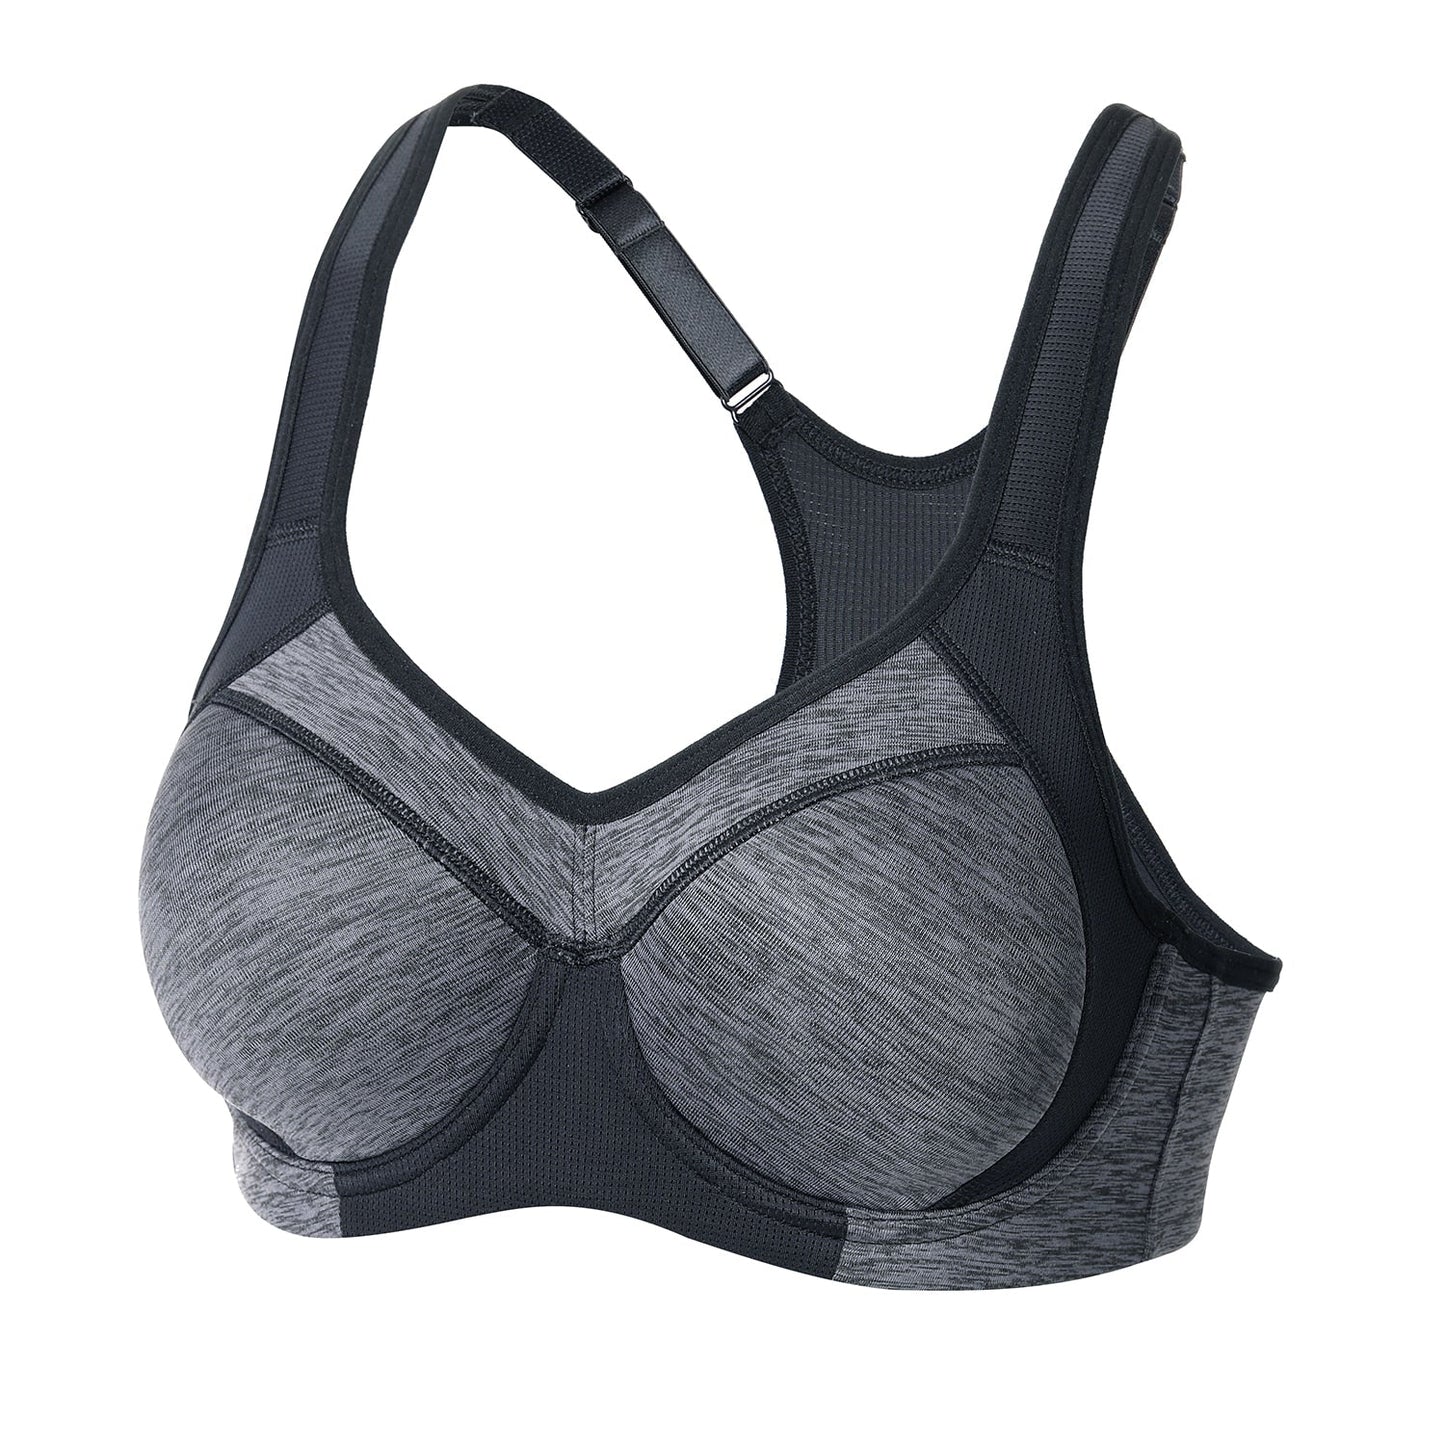 Sports Bra Women's Moisture-wicking High Impact Minimize Padded Full Support Racerback Underwire Sports Bra Top The Clothing Company Sydney